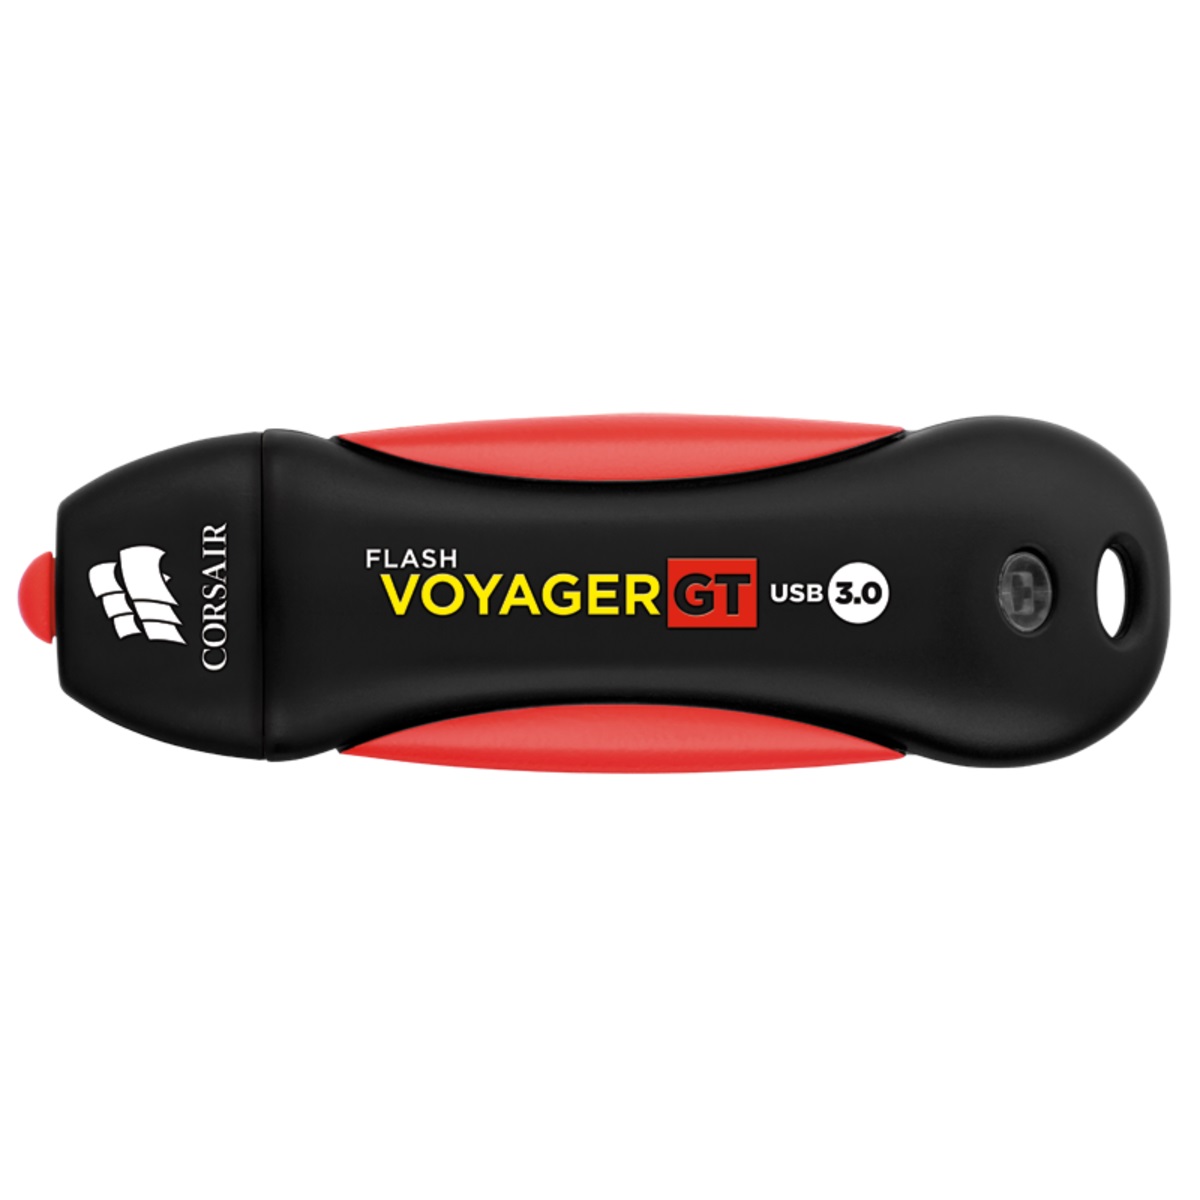 USB3.0 128GB Corsair Flash Voyager GT water-resistant all-rubber housi